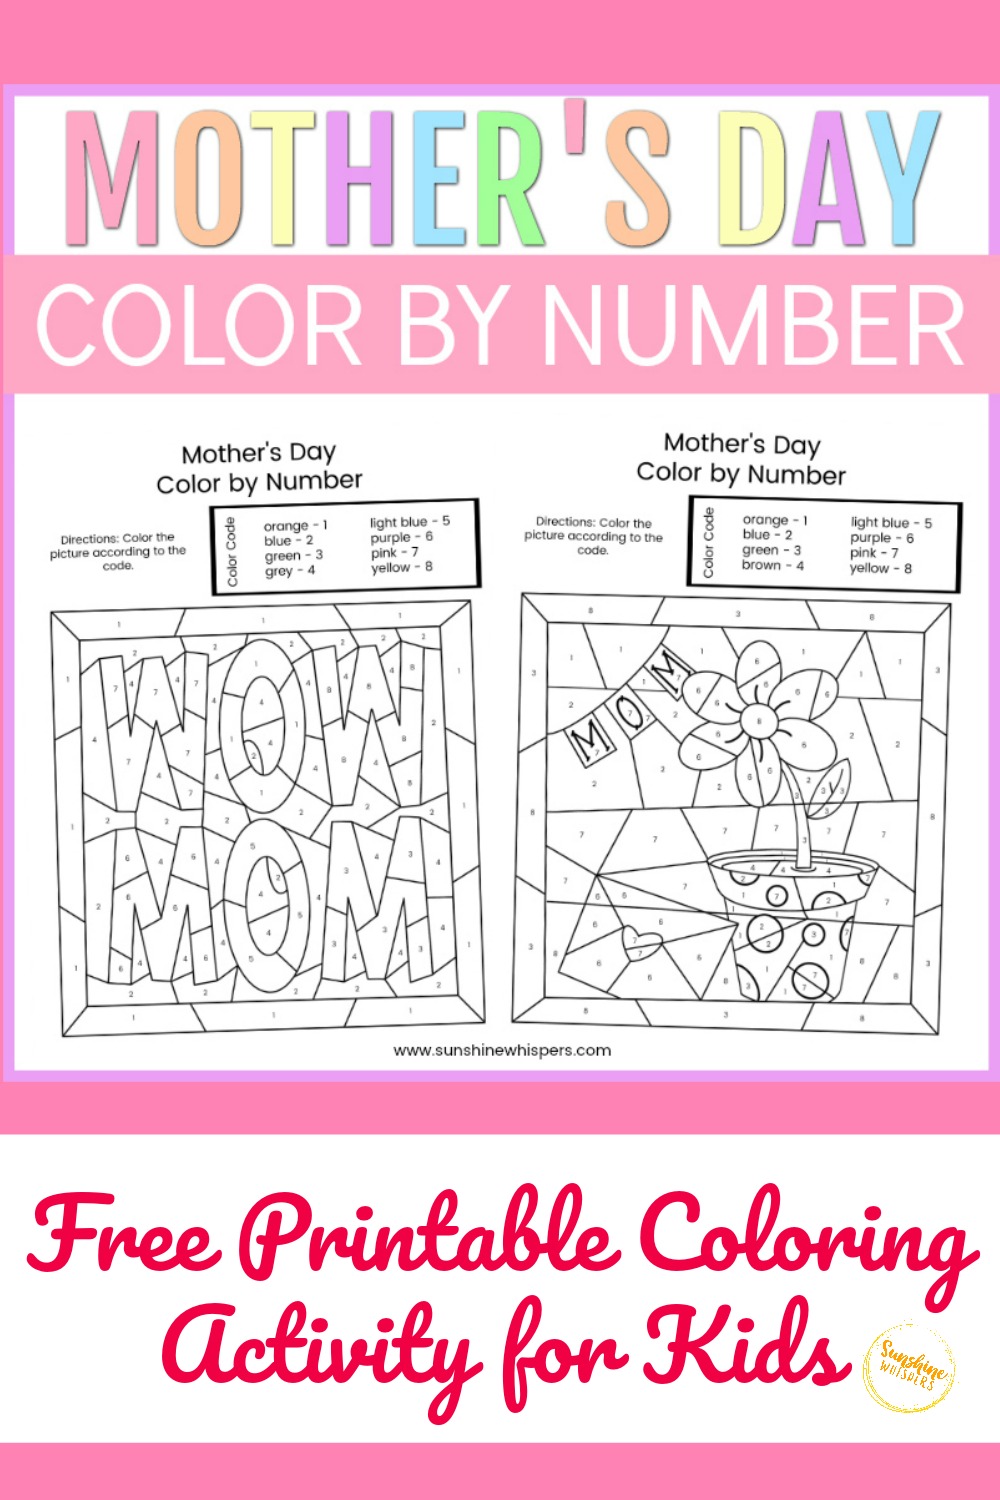 mother-s-day-color-by-number-free-printable-coloring-pages-sunshine-whispers